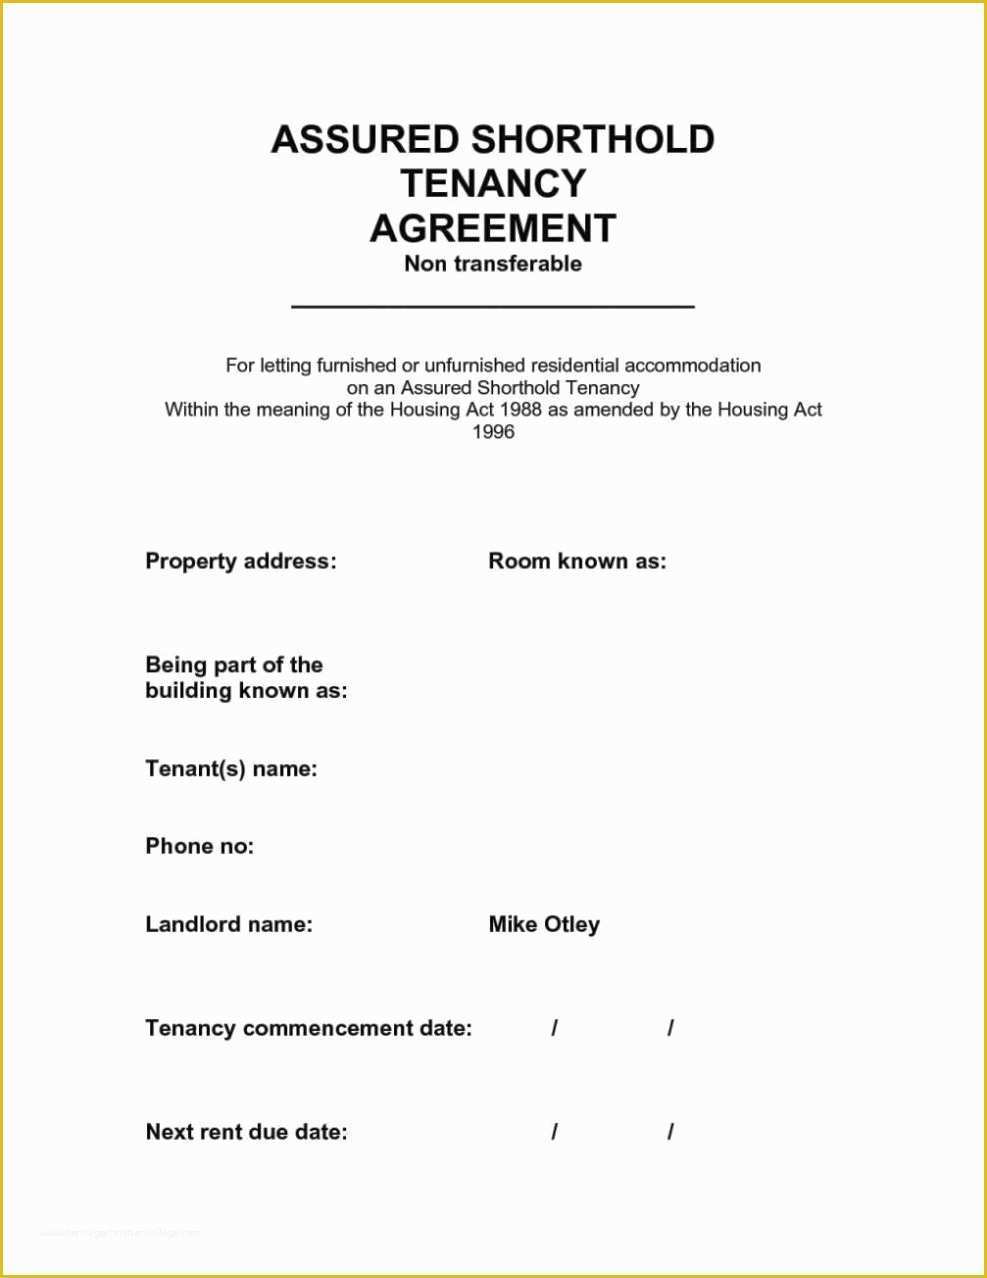 Tenancy Agreement form Template Free Of assured Shorthold Tenancy Agreement Uk Template Free